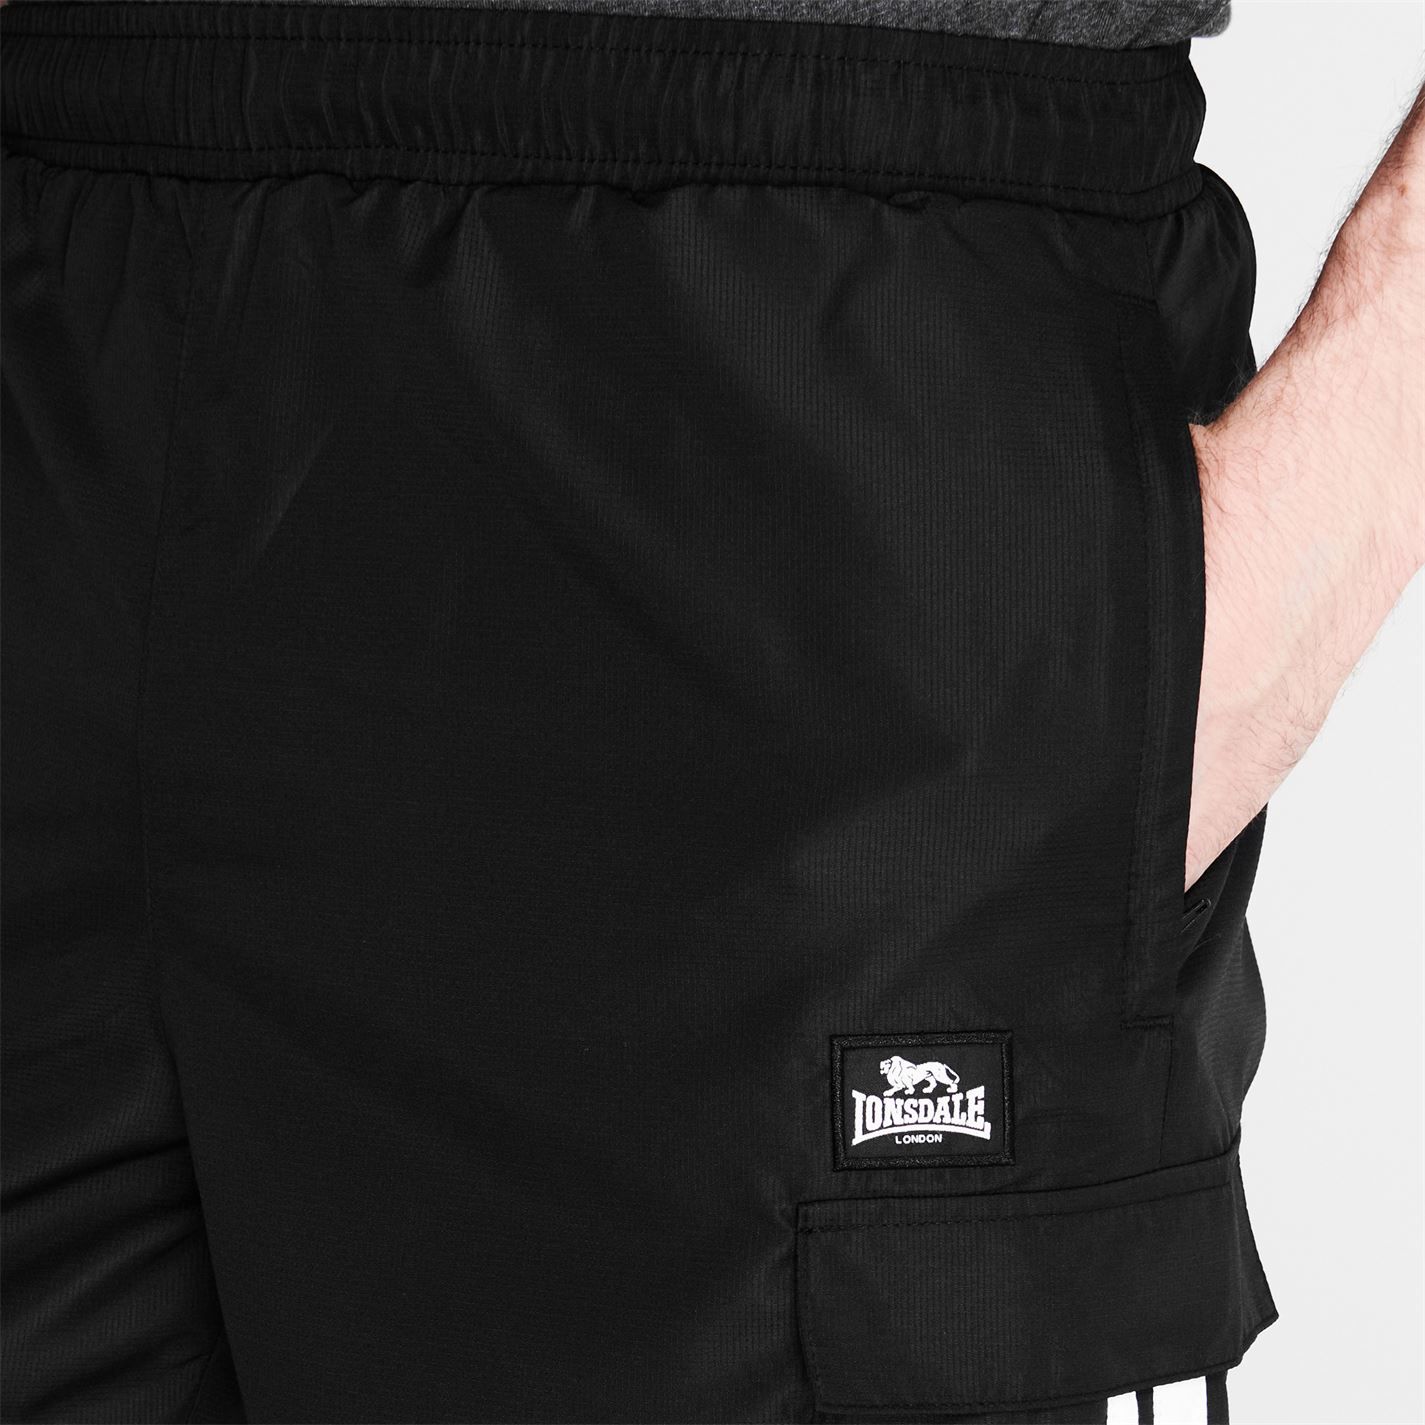 Lonsdale Mens Cargo Shorts Comfortable Fit Lightweight Mesh Lining ...